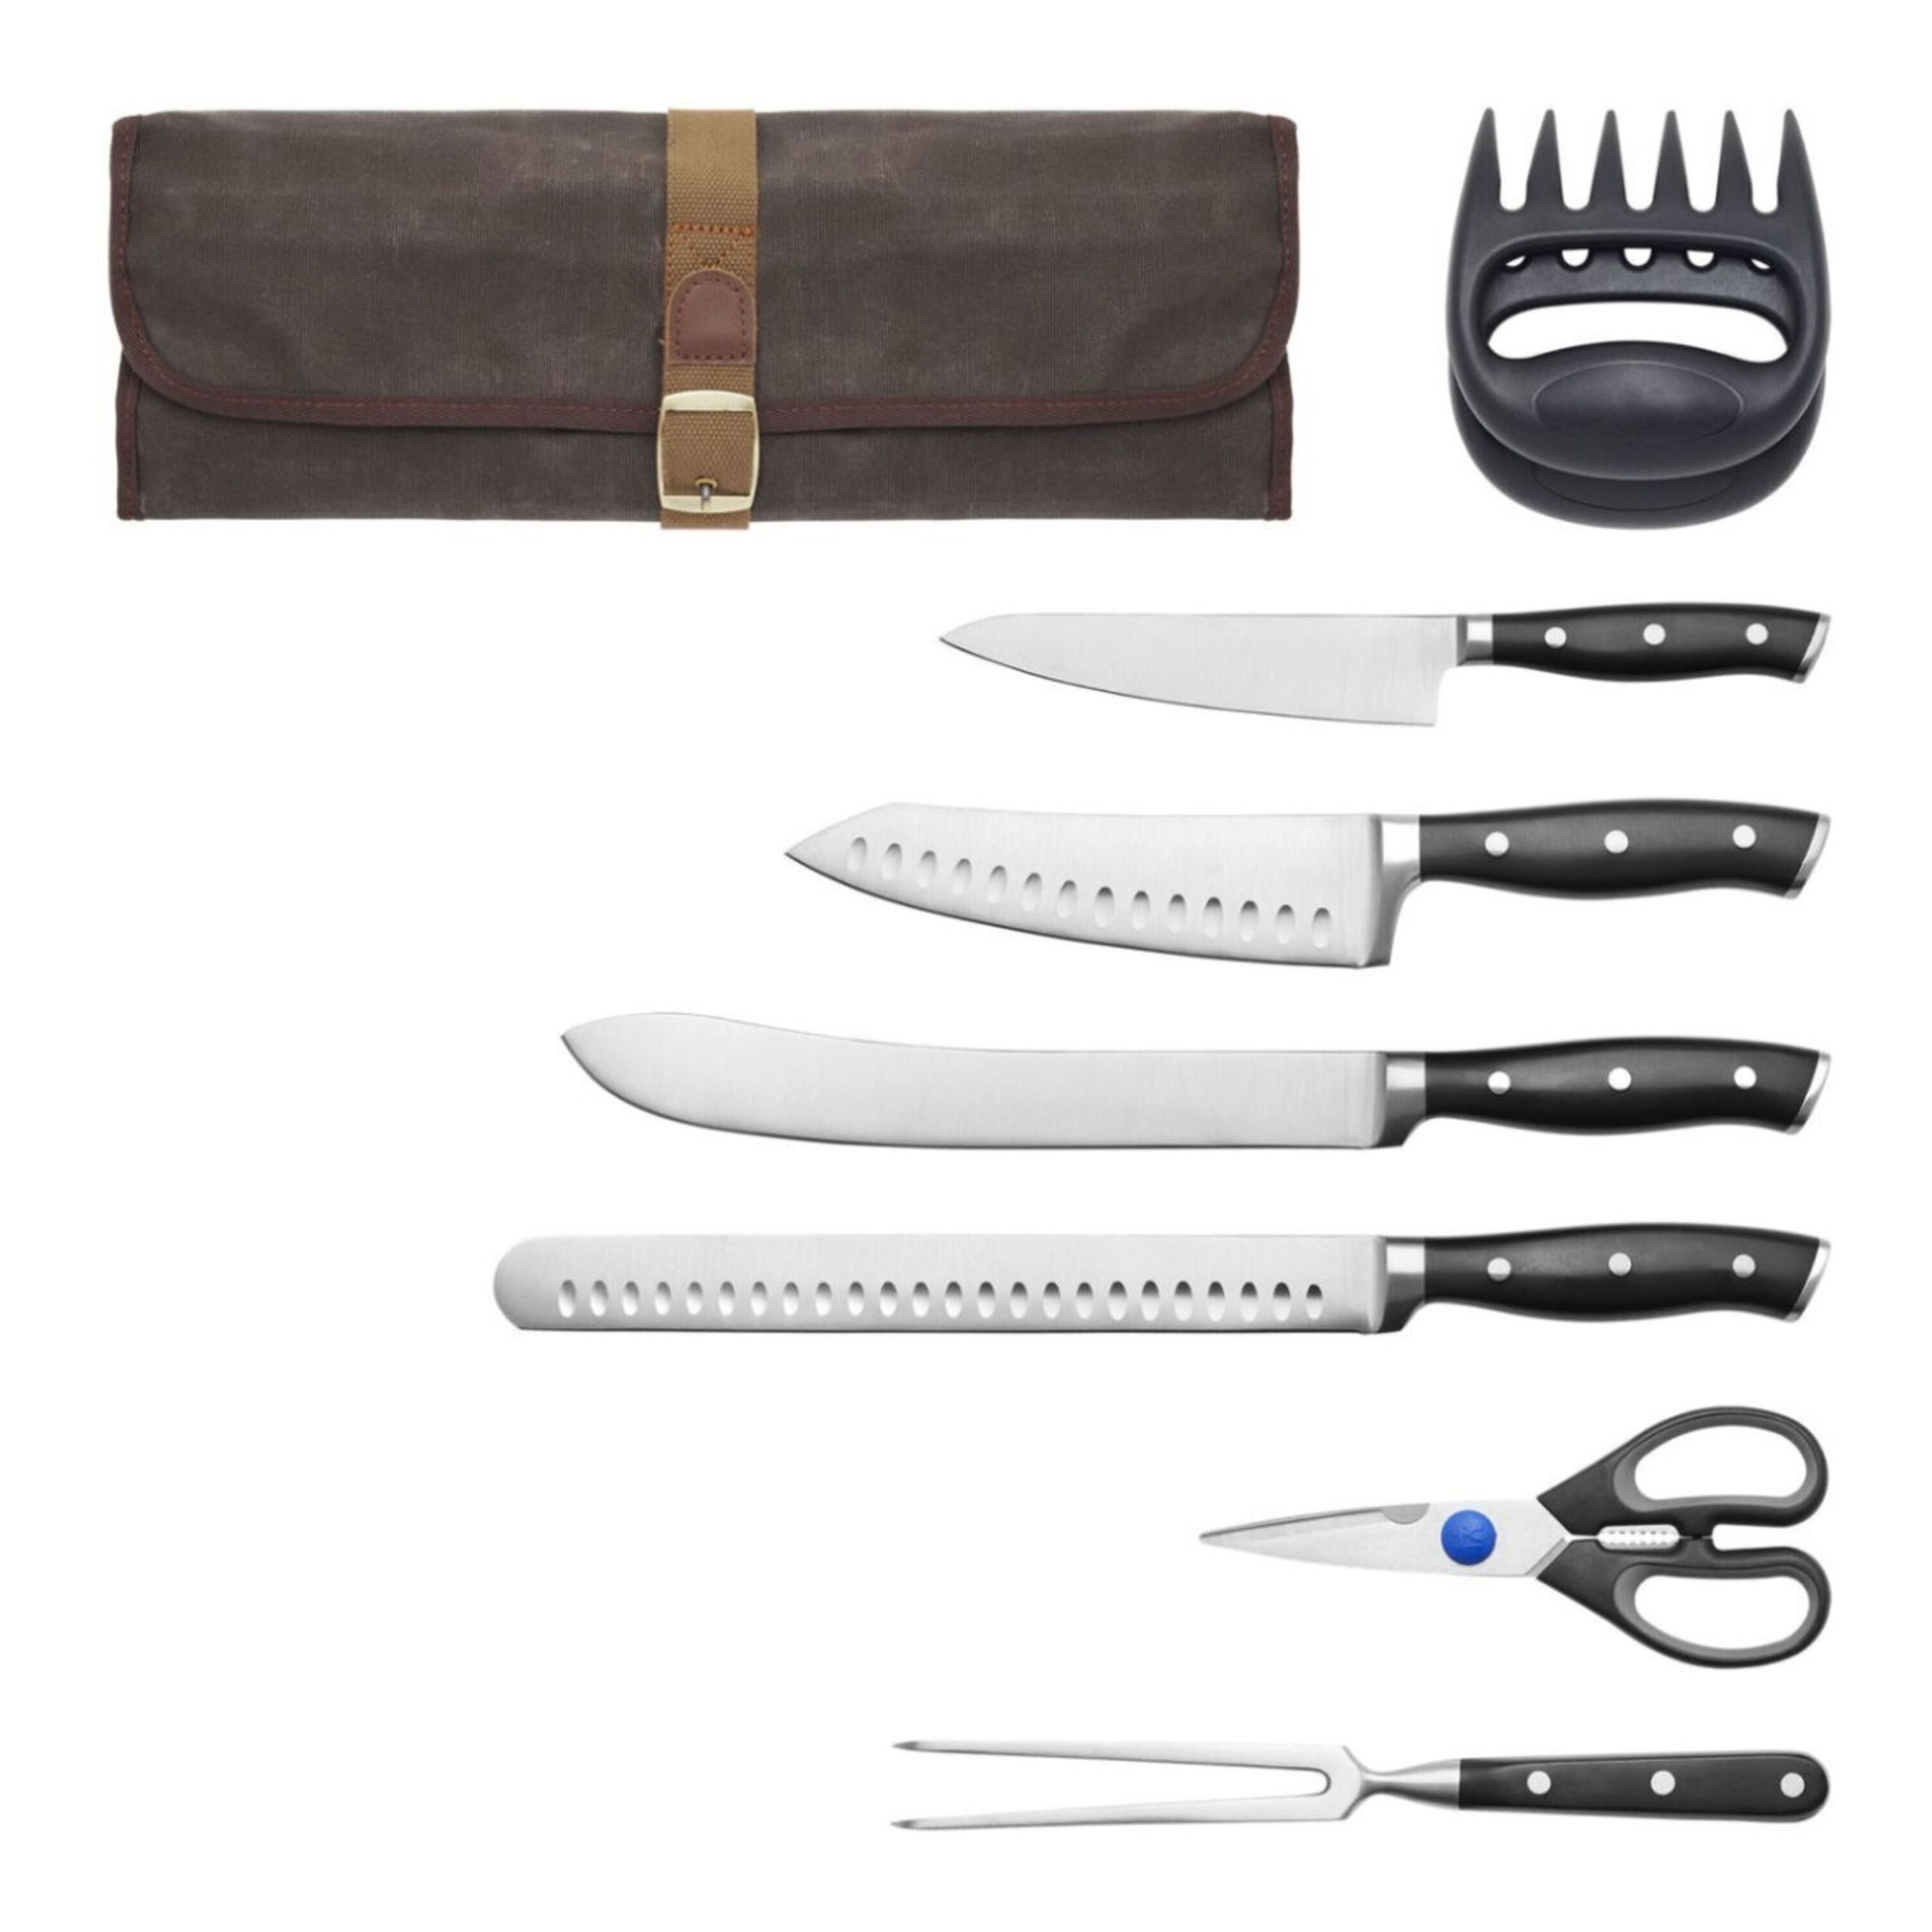 https://www.zwilling.com/on/demandware.static/-/Sites-zwilling-master-catalog/default/dw896cff38/images/large/ZWILLING_OutdoorKnifeSet9pc_02.jpg